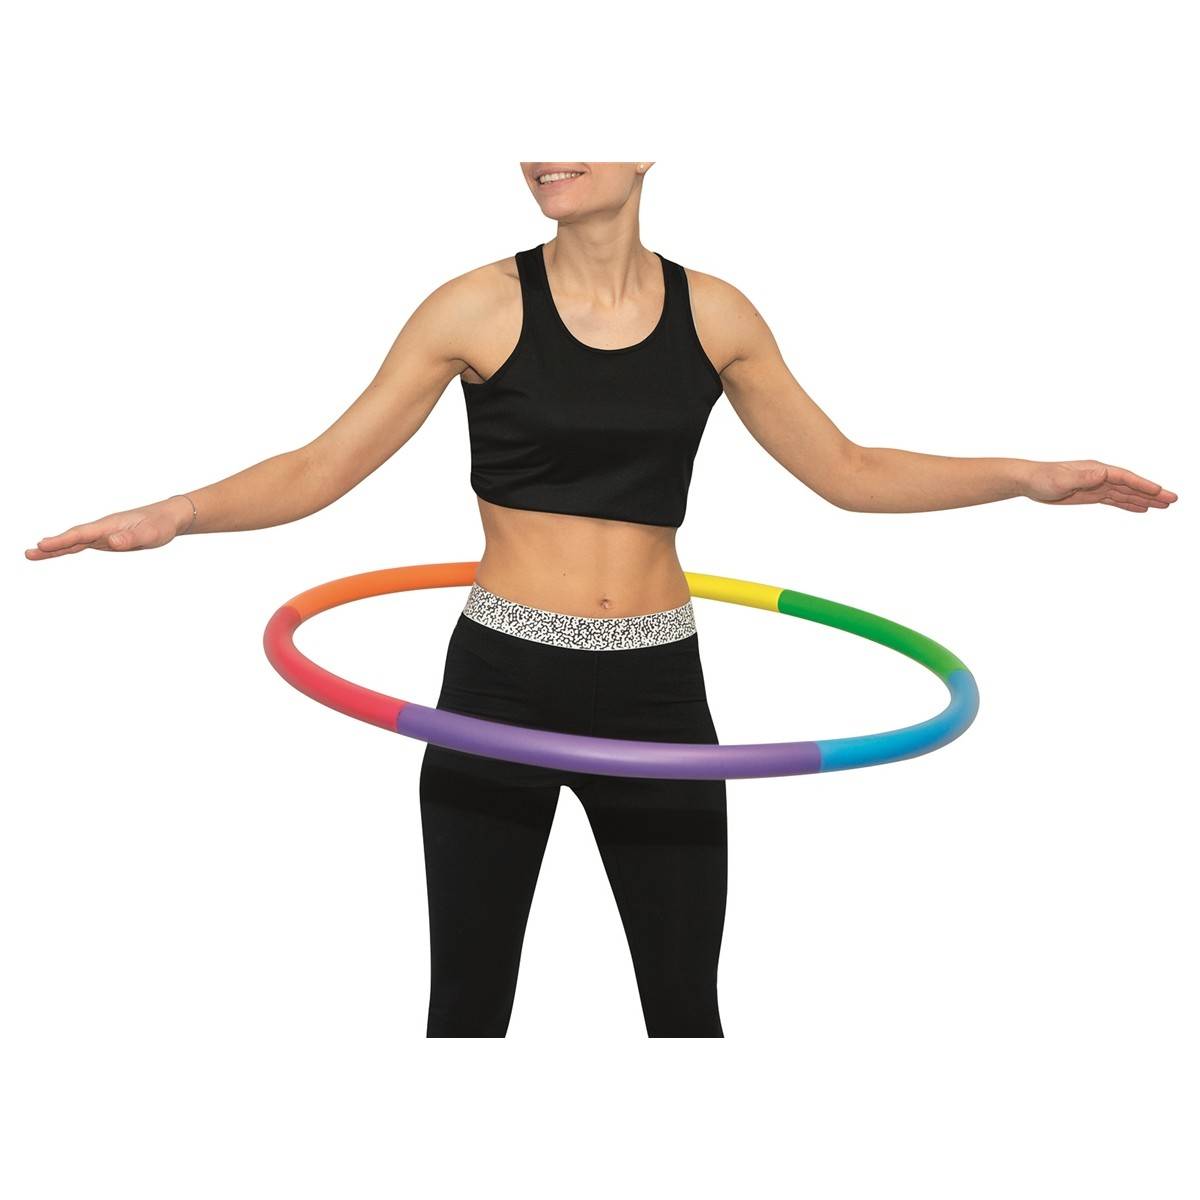 where to get a weighted hula hoop